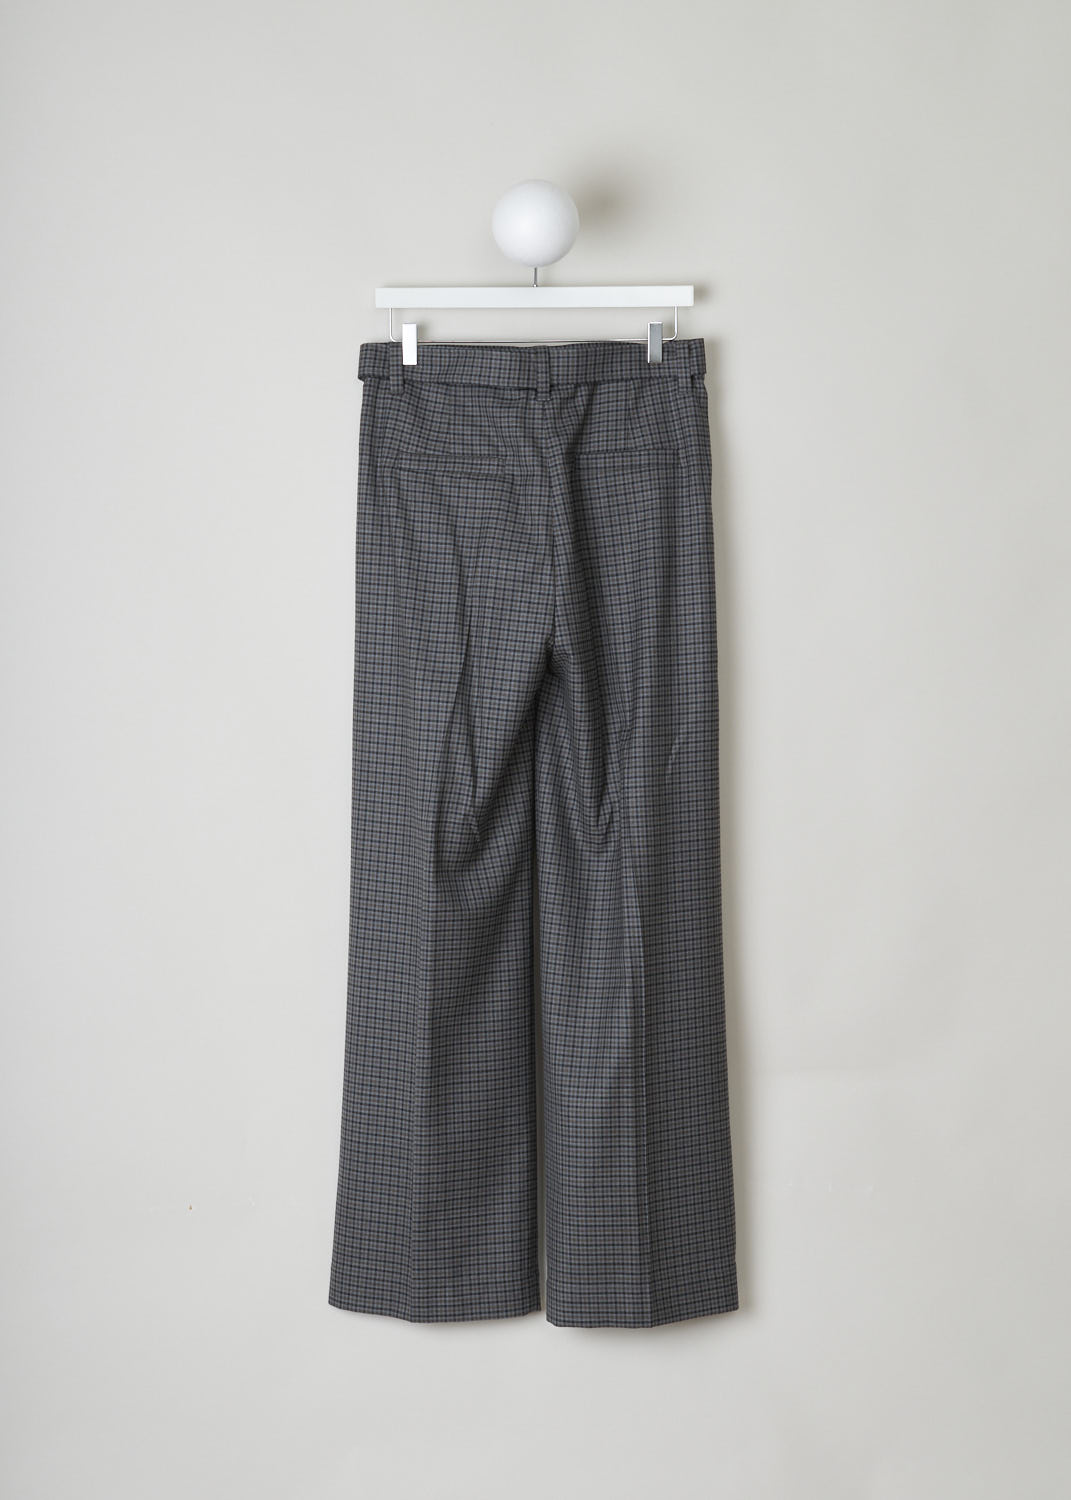 BRUNELLO CUCINELLI, GREY CHECKERED WOOL TROUSERS, MA197P7404_C001, Grey, Back, These grey checkered wool trousers feature a partly elasticated waistband with a detachable belt in the same checkered fabric. The belt has a subtle beaded embellishment. These trousers have slanted pockets and a pleated front and straight, loose fitting pant legs. In the back, two welt pockets can be found. 
